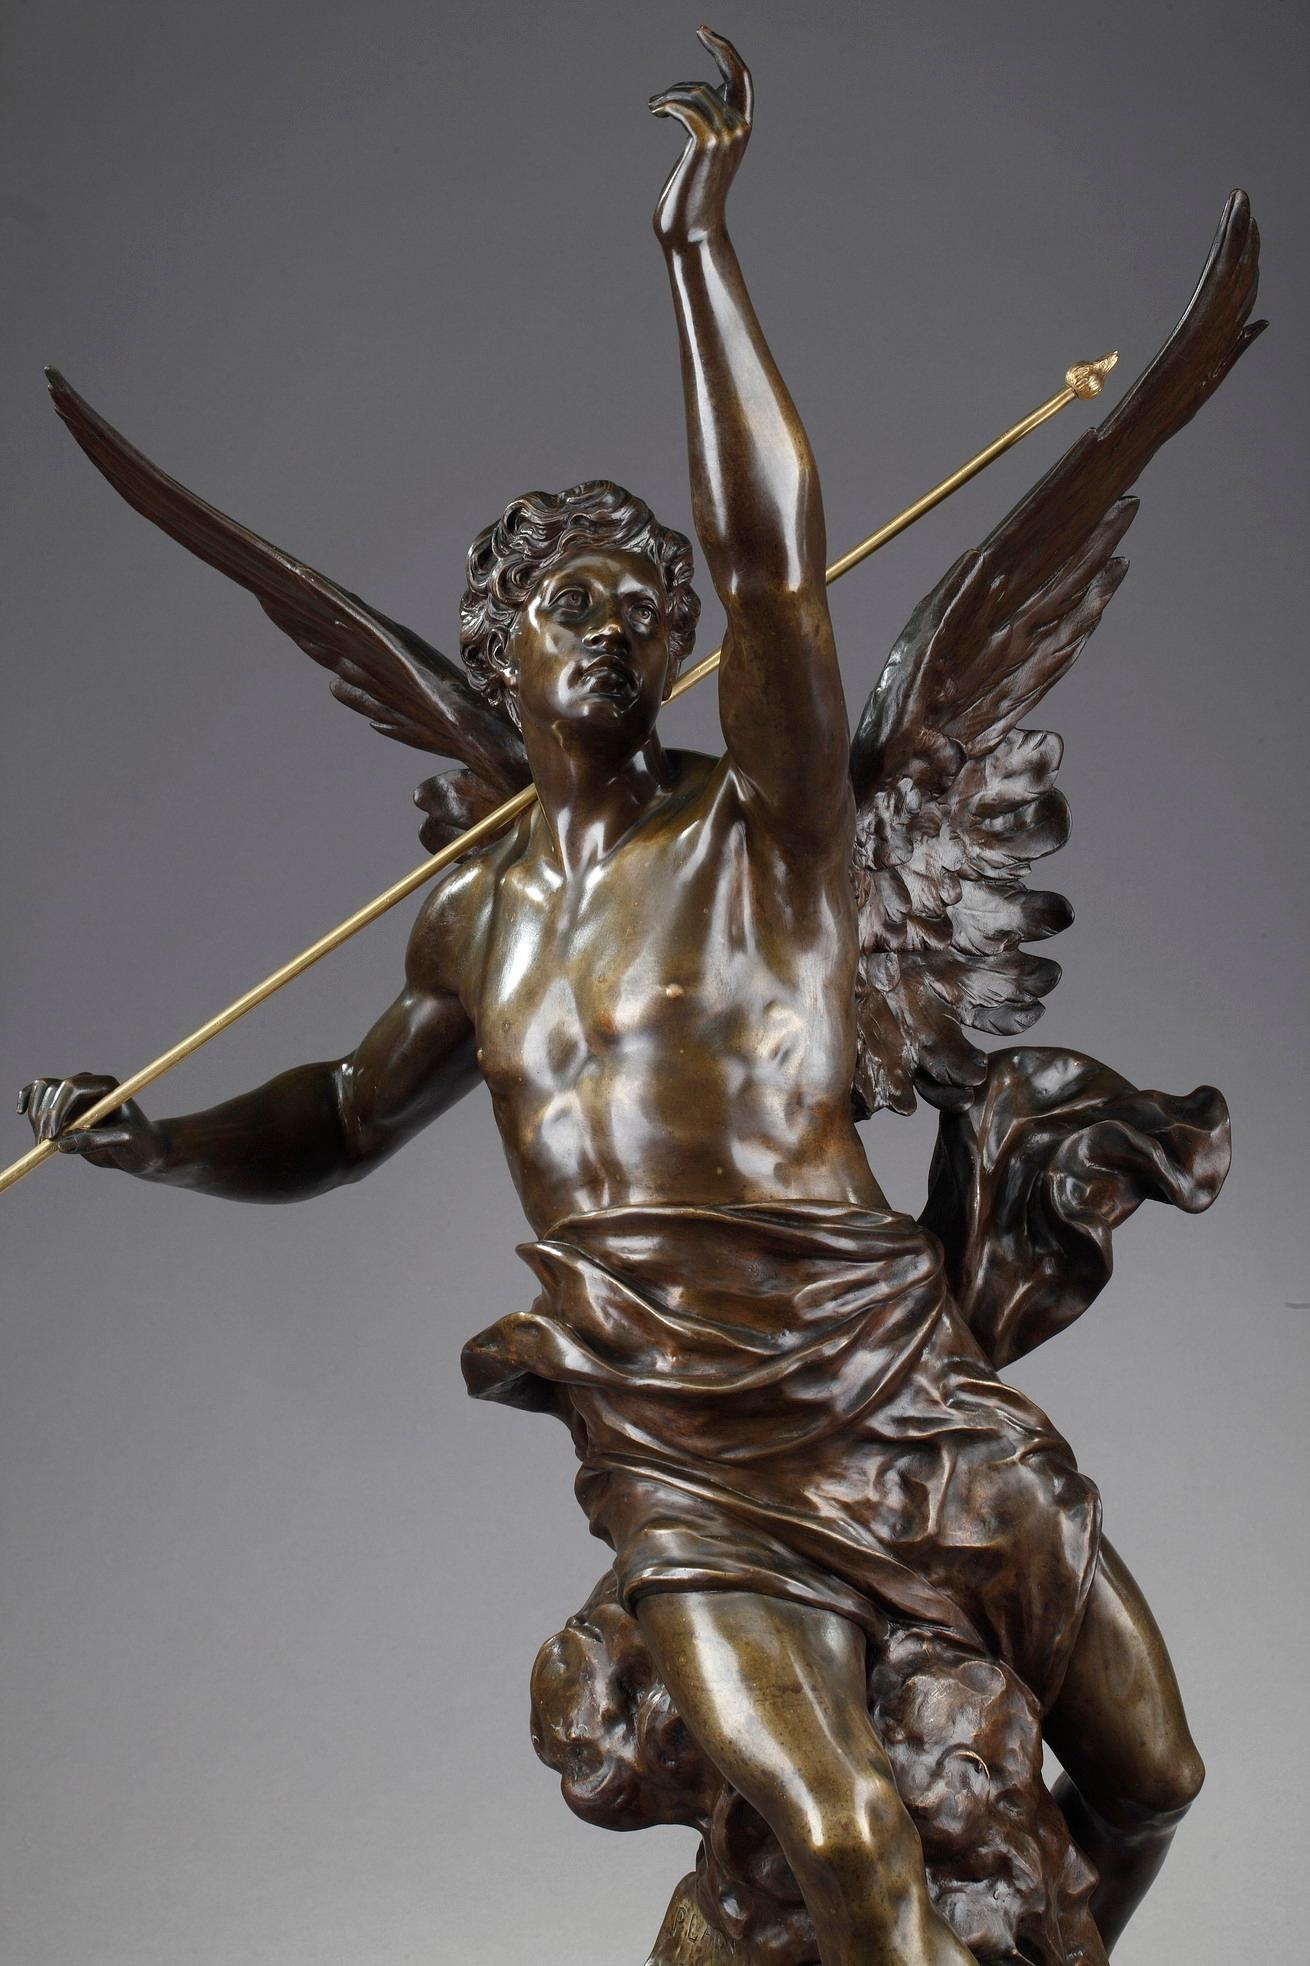 Large allegorical bronze sculpture with brown patina La Pensée (The Thought) featuring a winged man with an outstretched arm seated on clouds. Inscribed on the pages of the book at his feet the names of important philosophers and writers such as